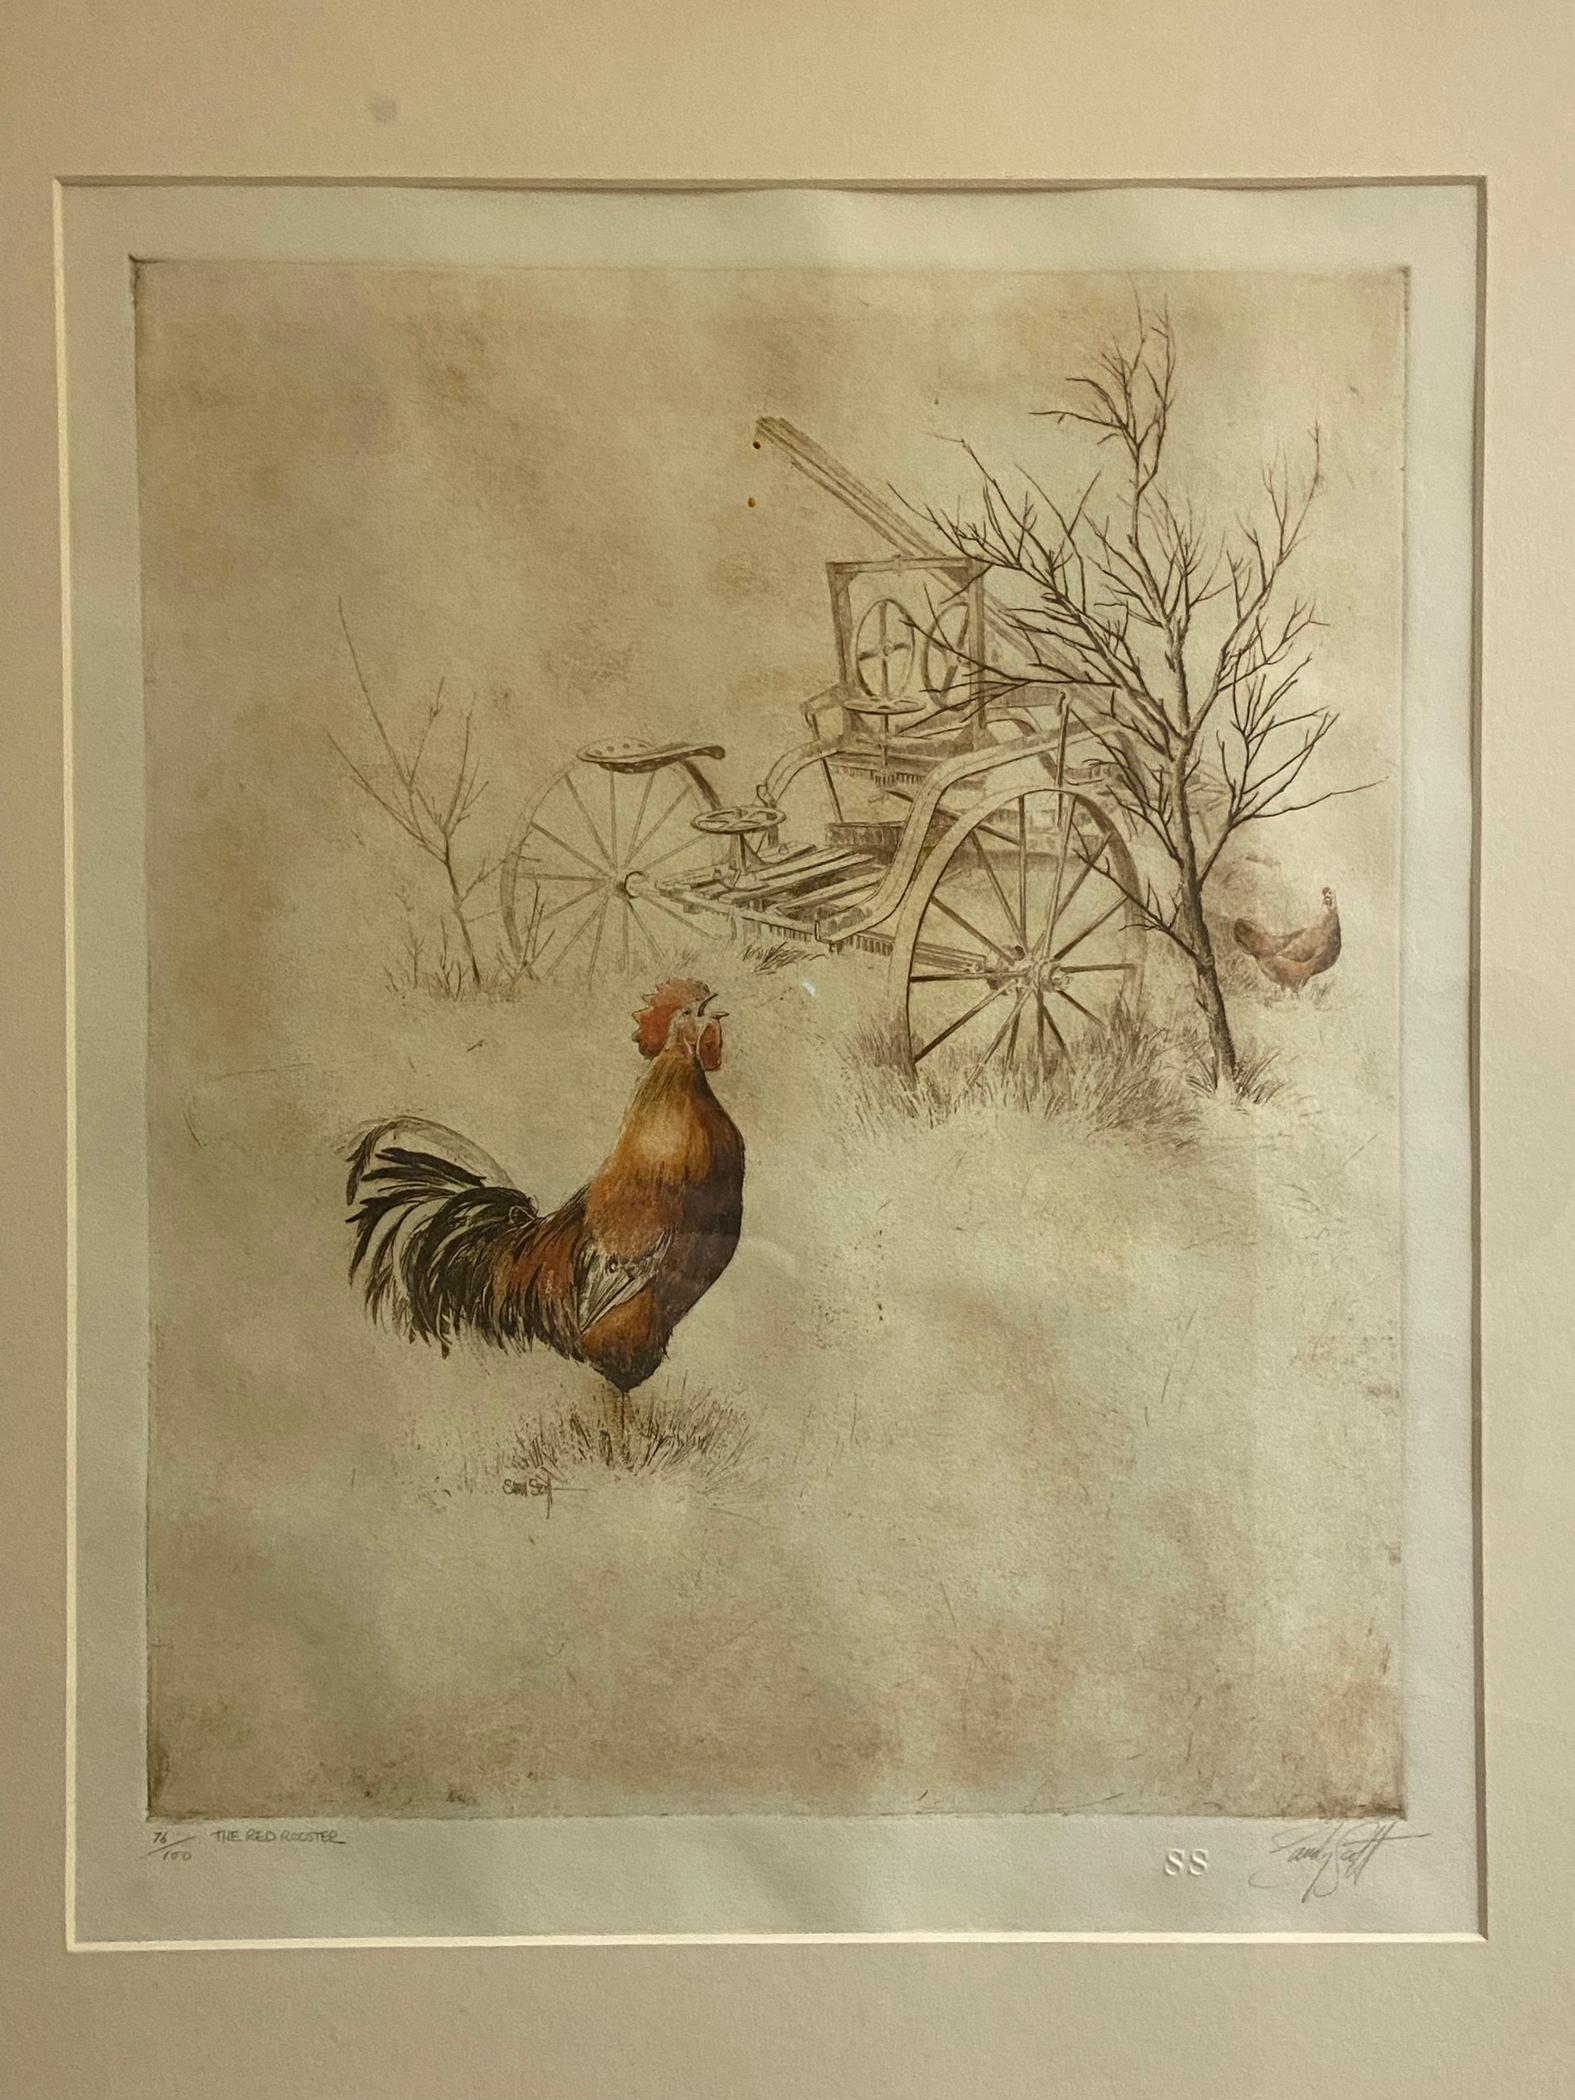 Red Rooster by Sandy Scott
Wildlife Hand-colored Etching
14x11